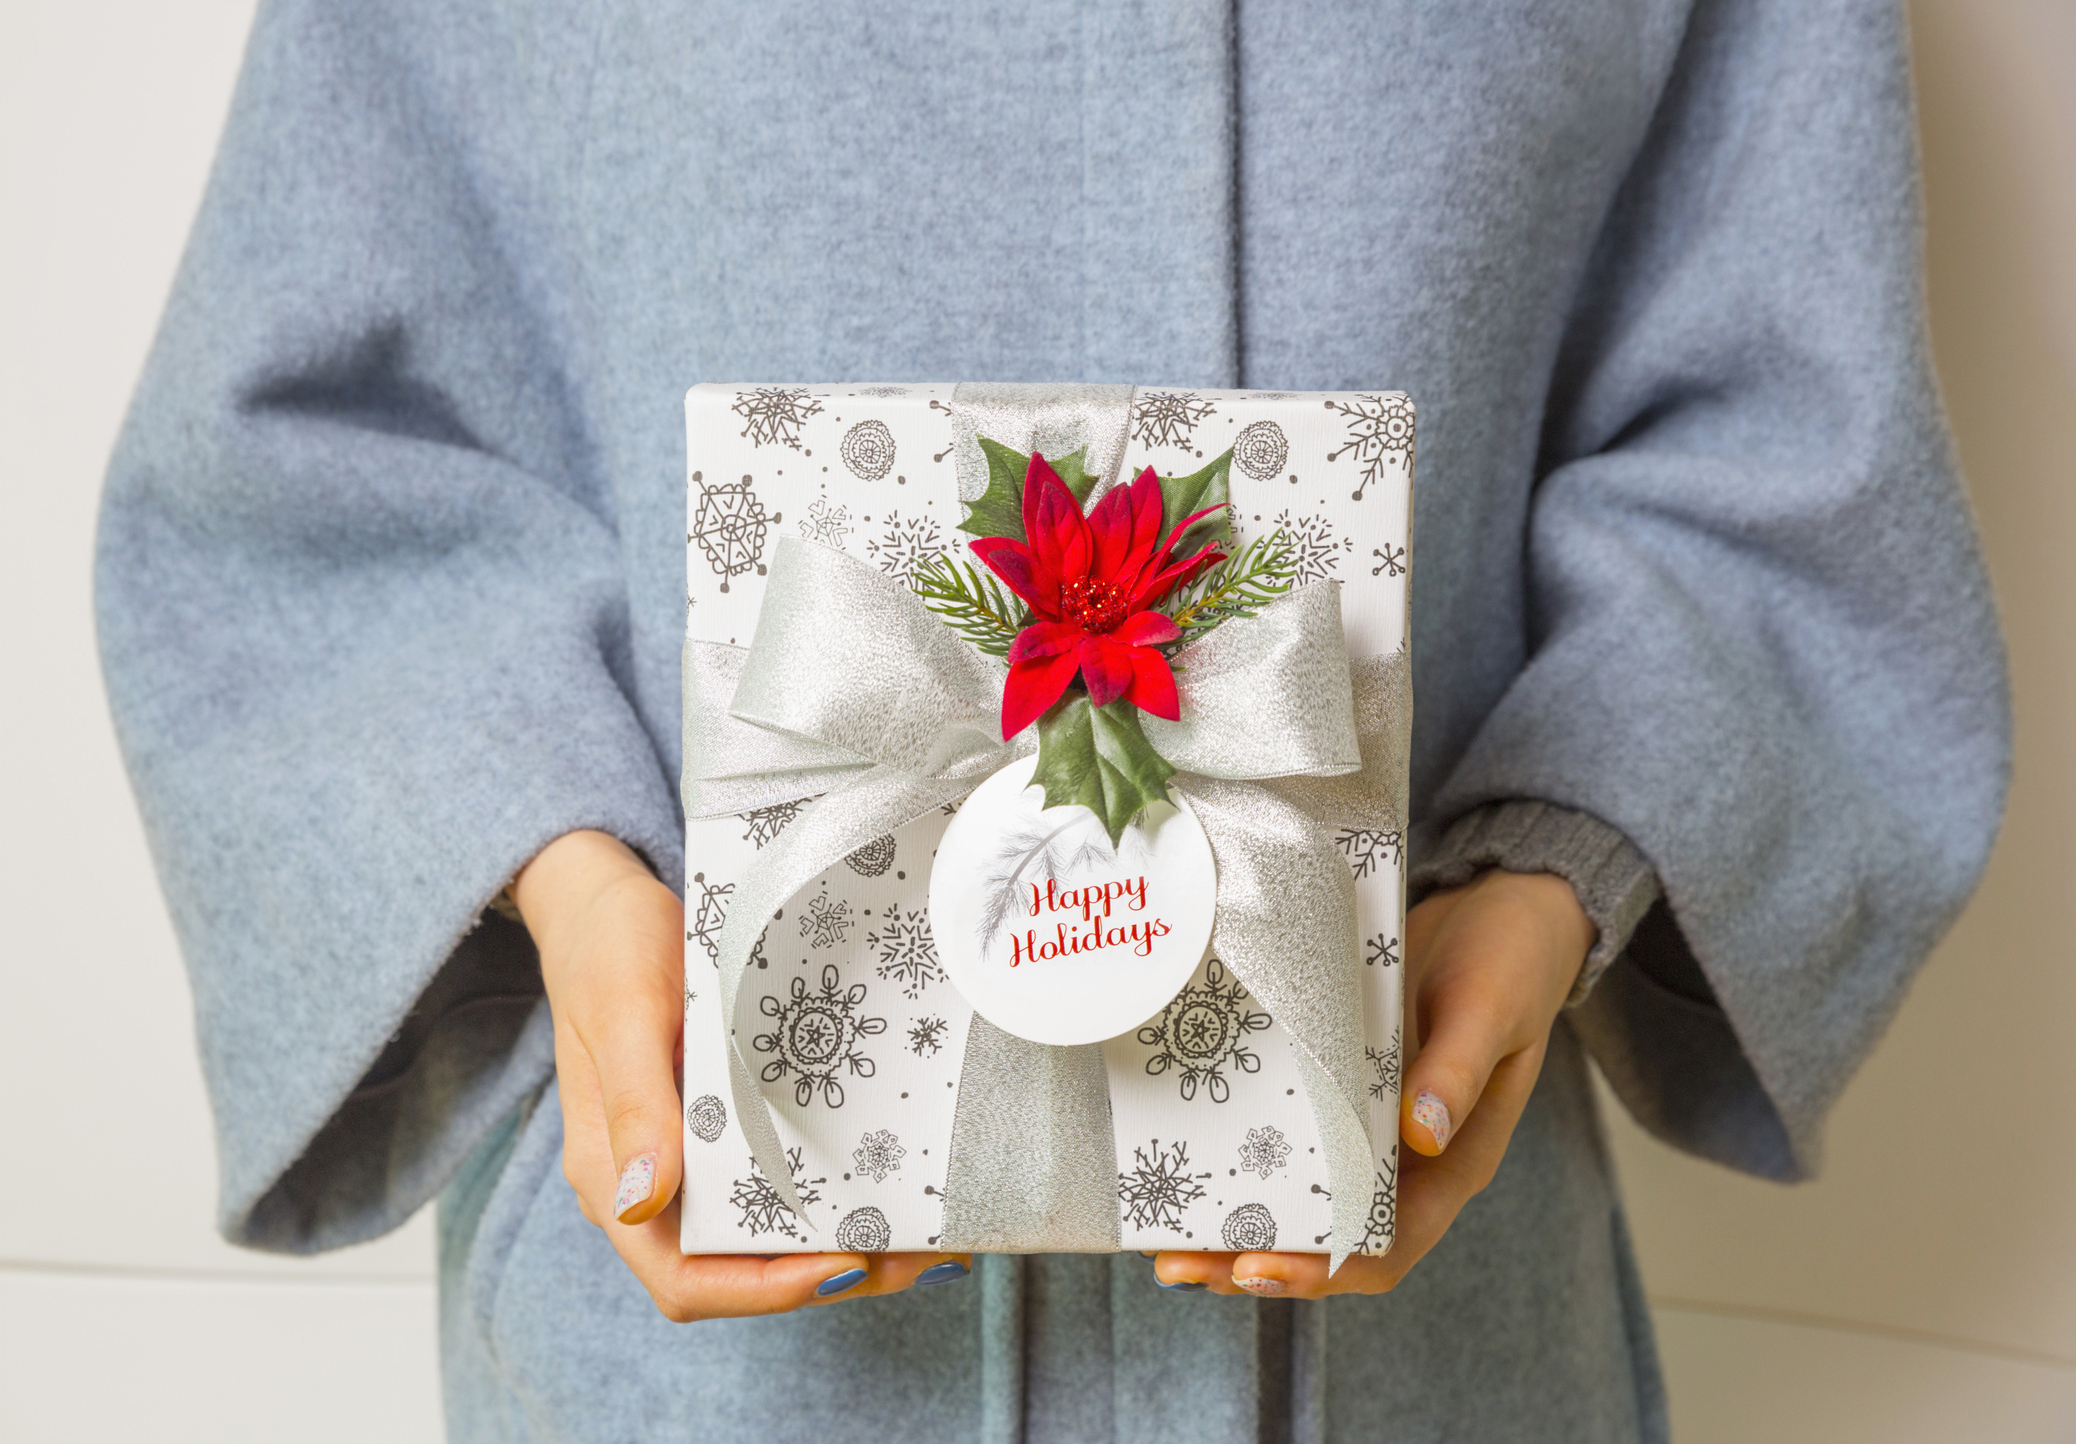 Woman holding holiday gift